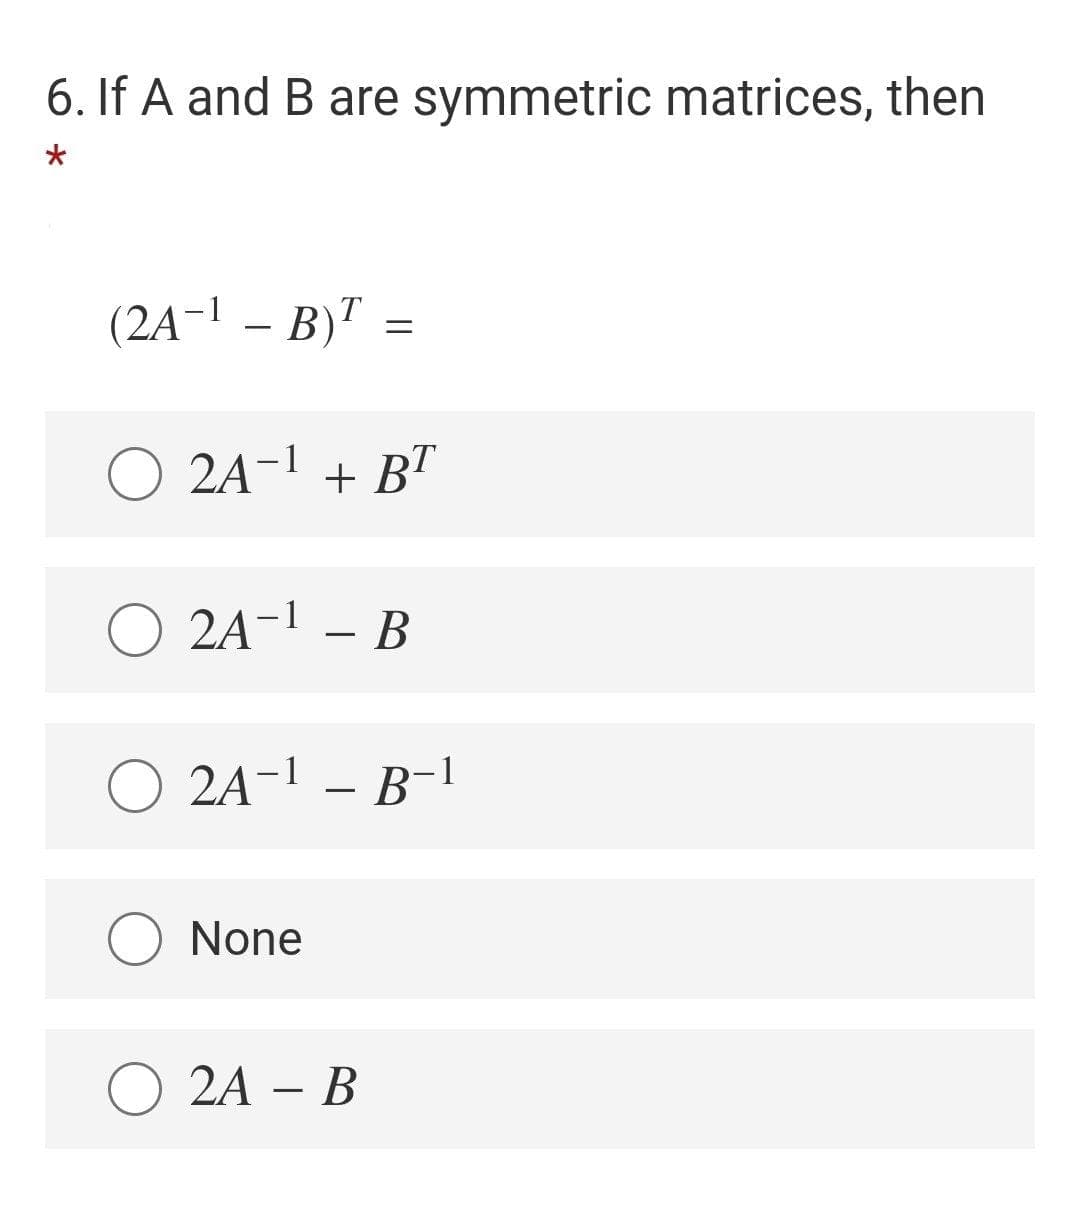 6. If A and B are symmetric matrices, then
(2A-1 – B)" =
O 2A-1 + BT
O 2A-1 – B
O 2A-1 – B-1
None
О 2A — В
